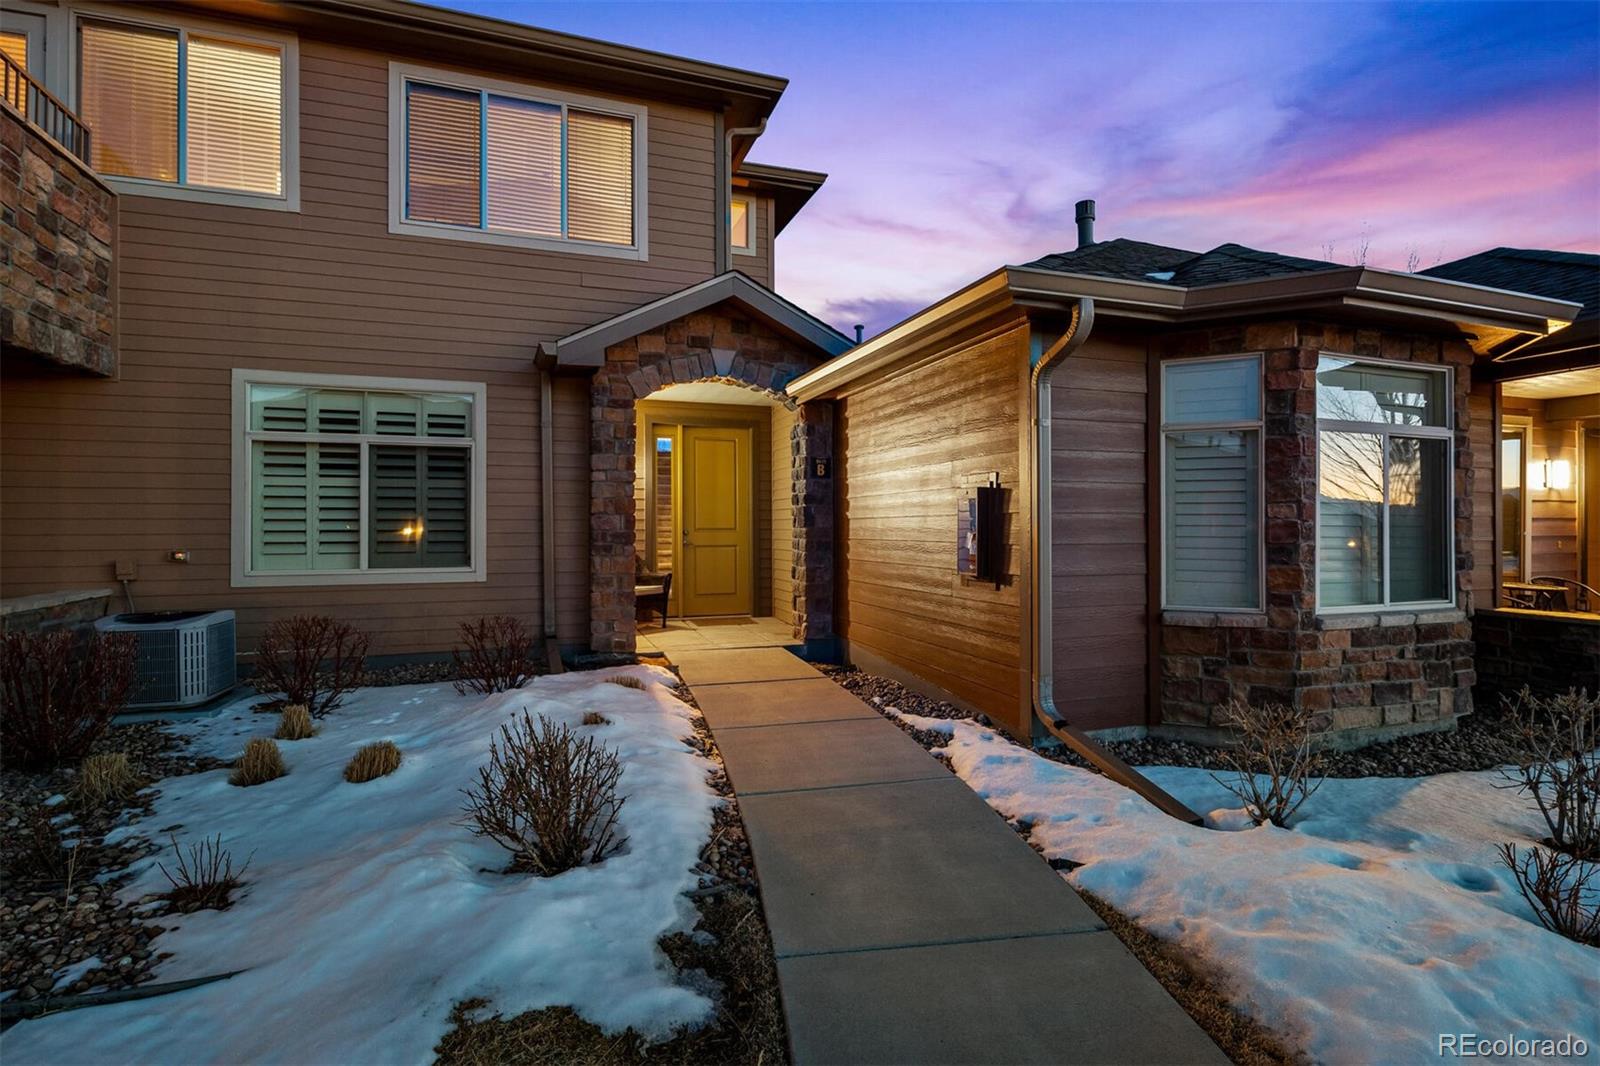 Report Image for 8611  Gold Peak Drive,Highlands Ranch, Colorado